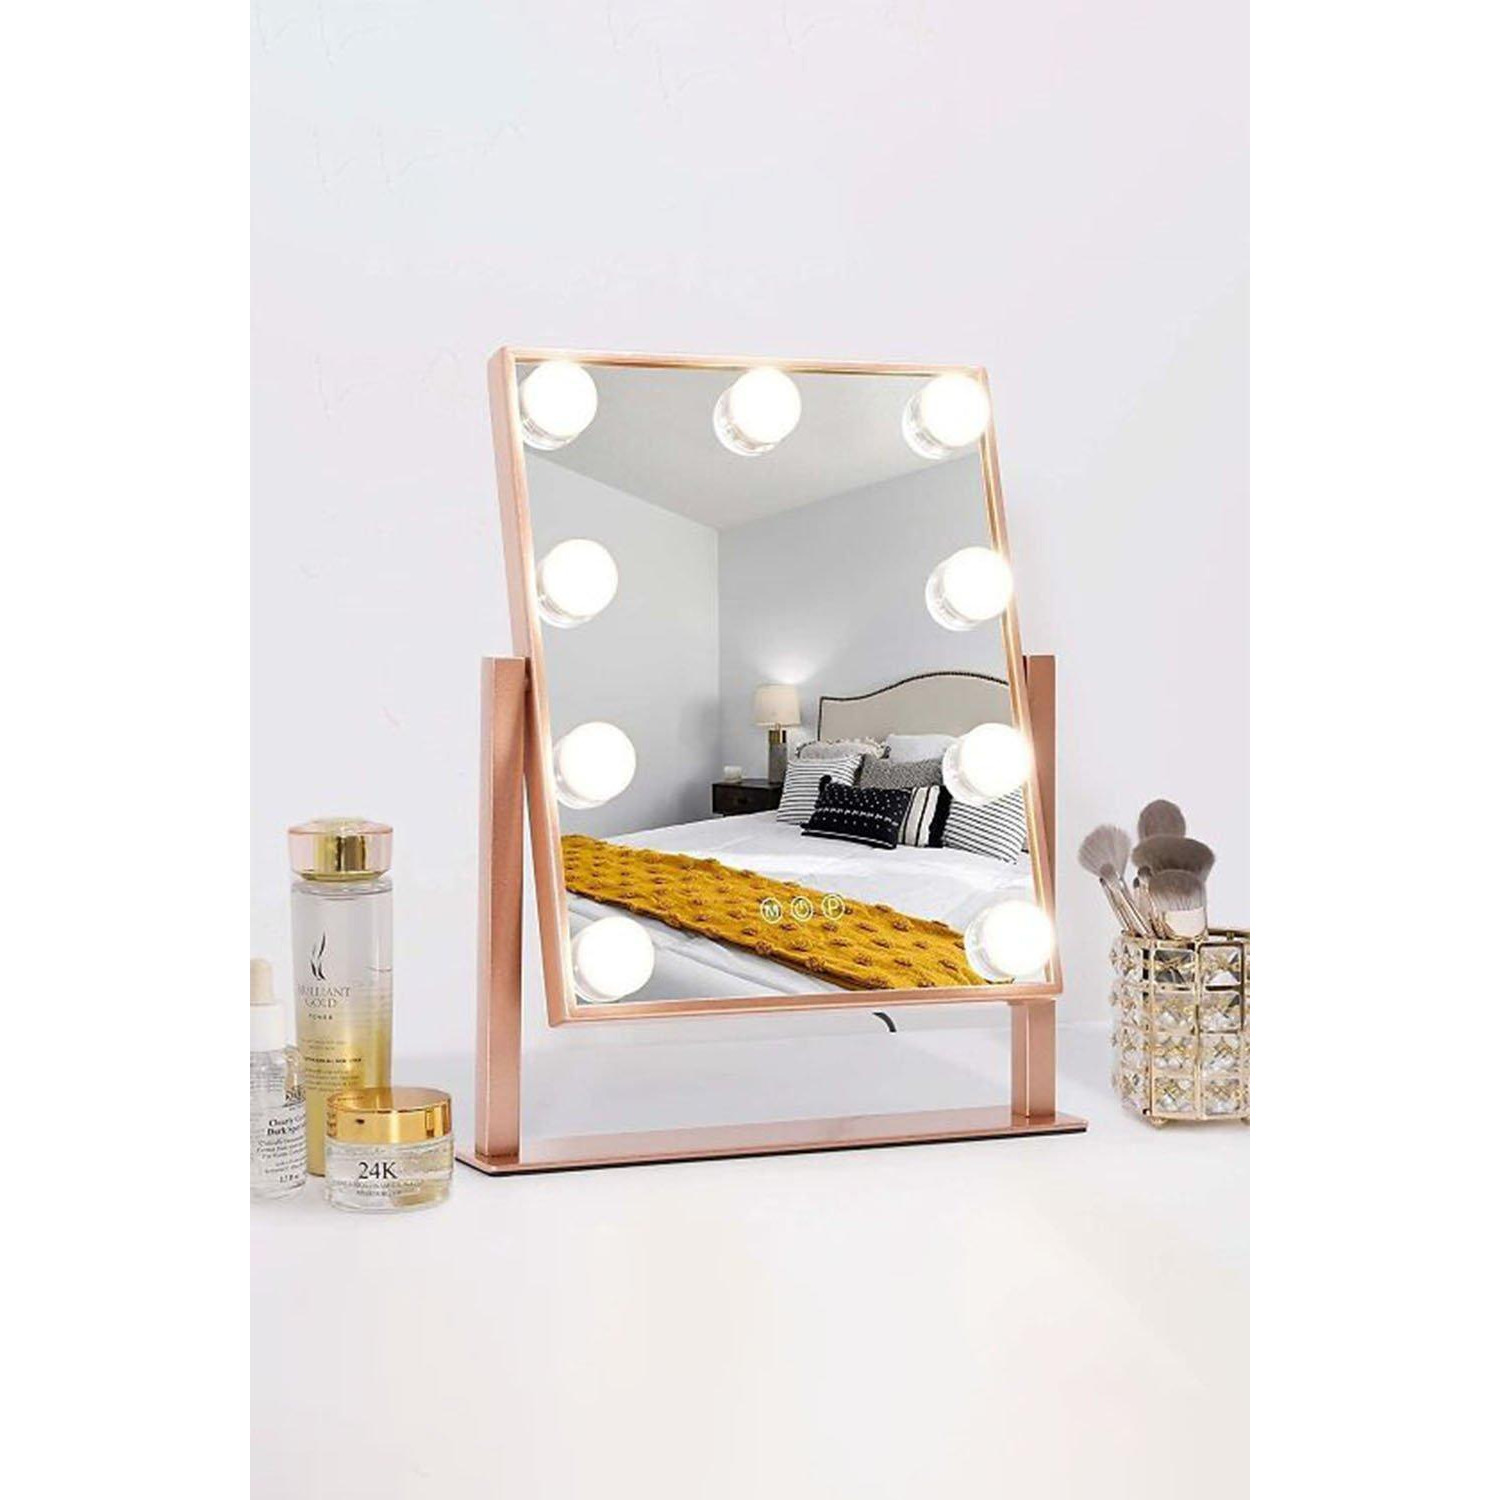 Touch Control Design Hollywood Vanity Tabletop Mirror with 9 LED Light Bulbs ,30.5*35.5cm - image 1